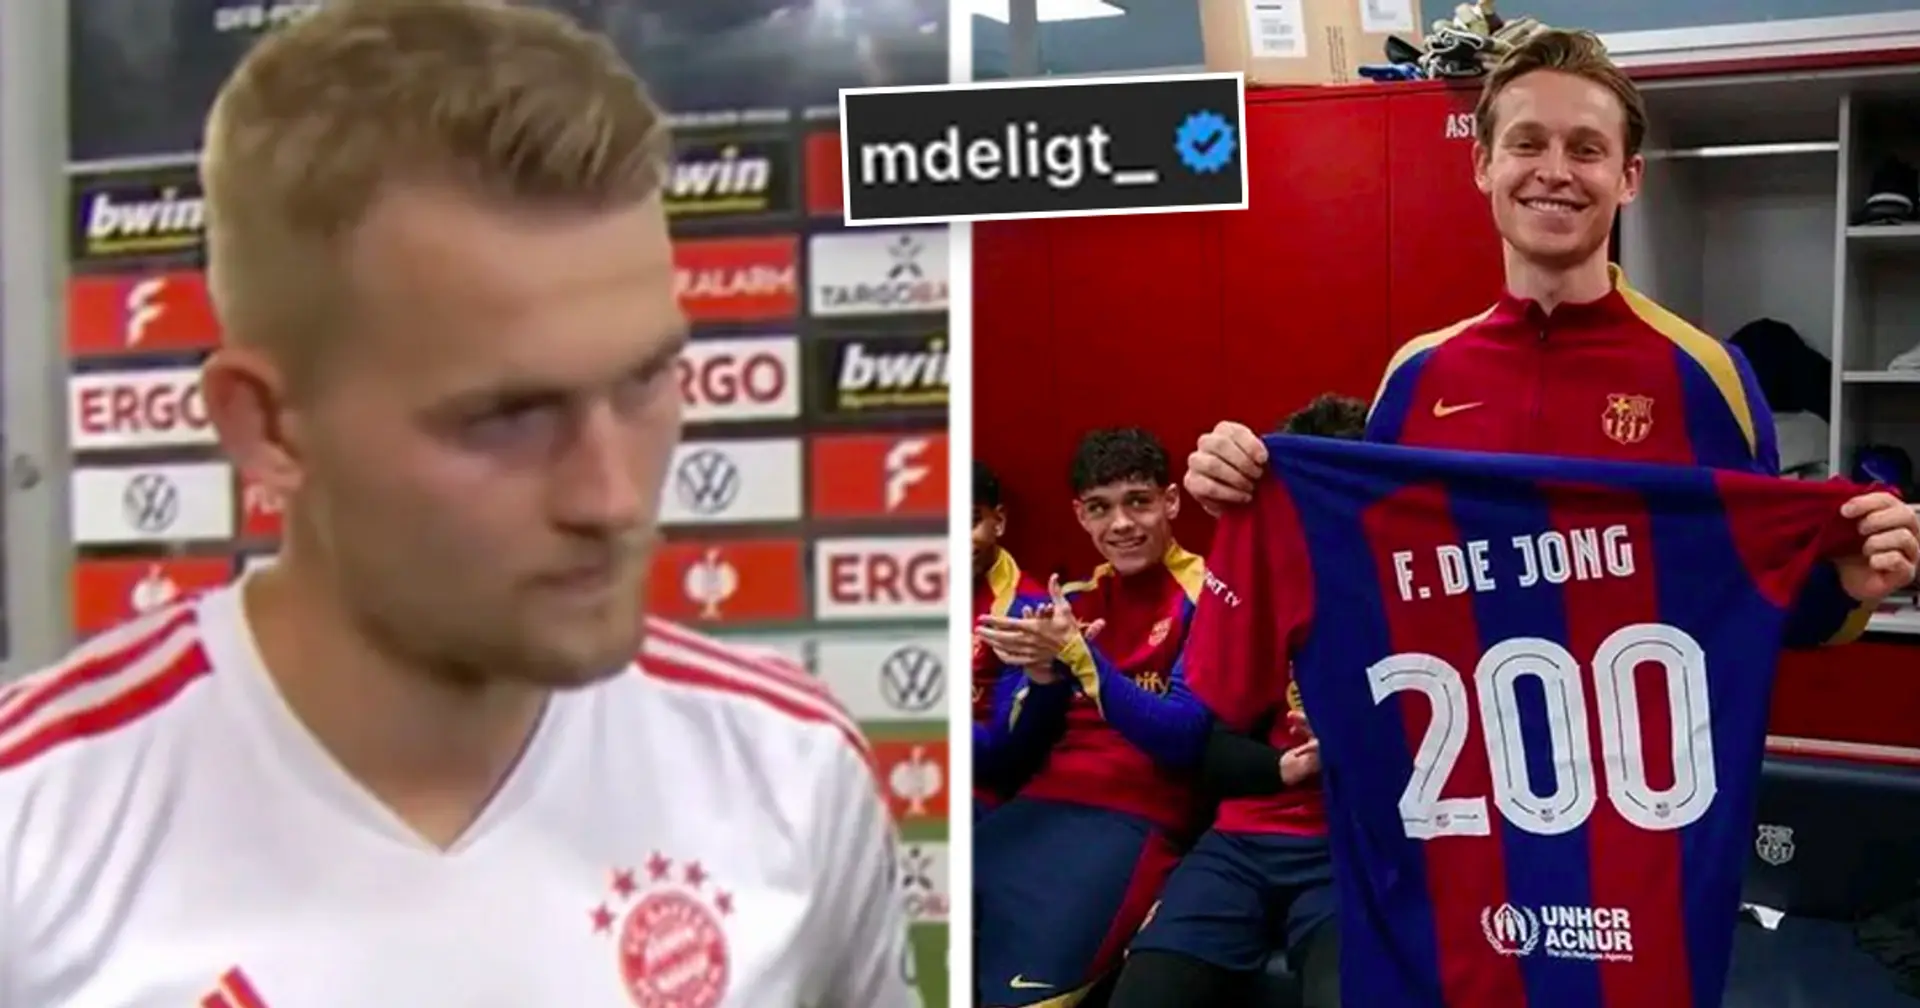 Matthijs de Ligt reacts to De Jong's historic Barca feat – just as Bayern exit rumours emerge